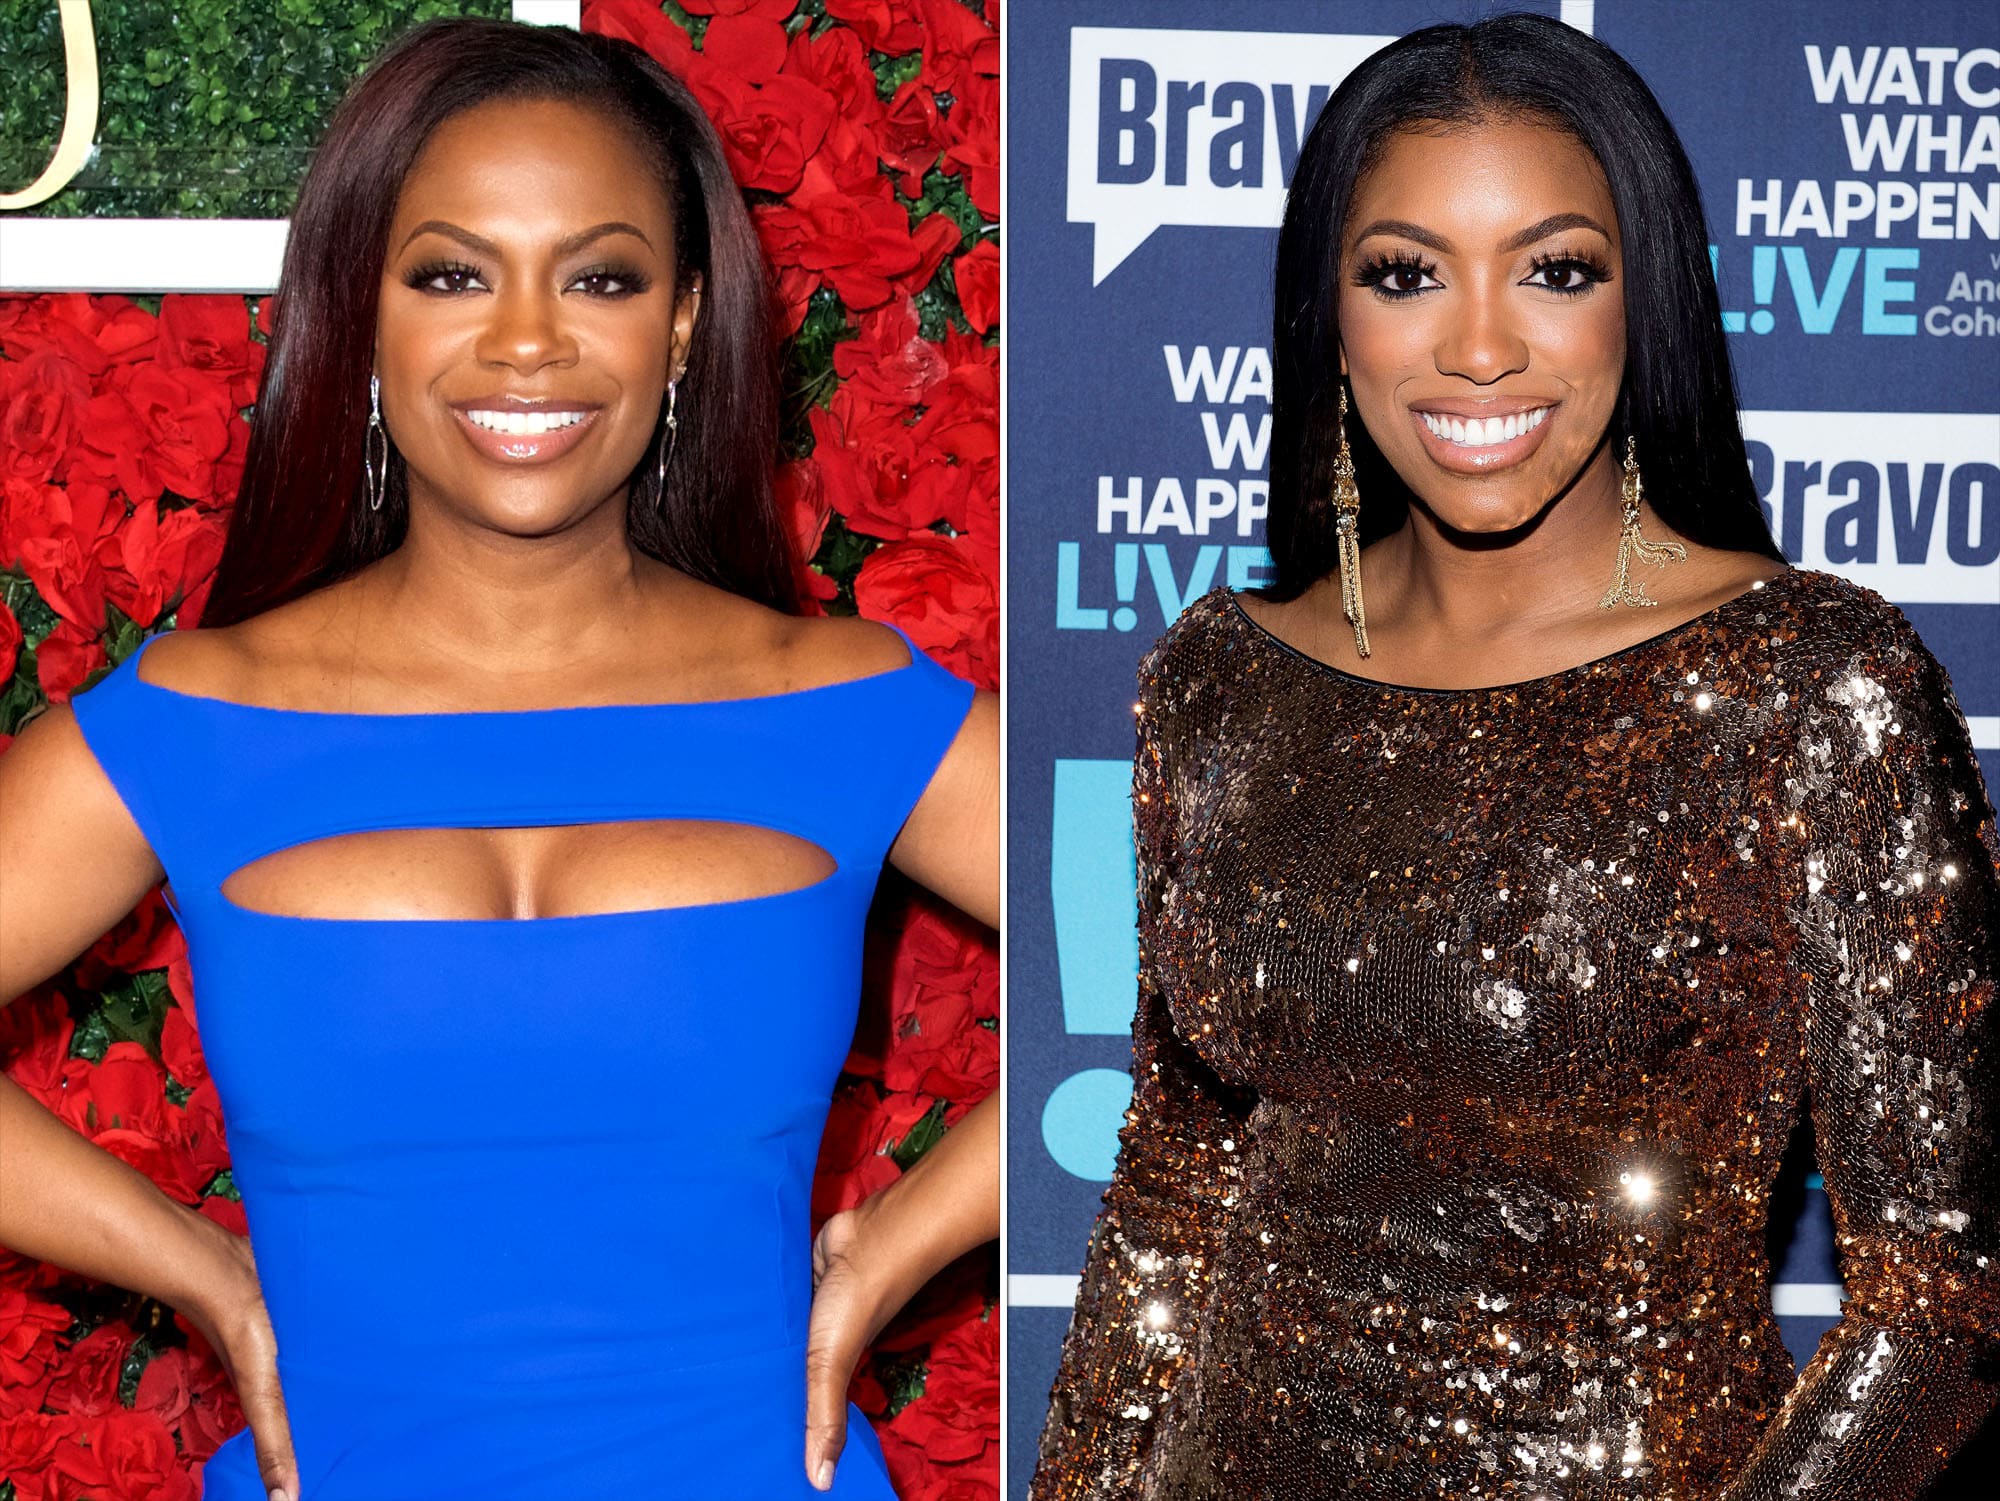 Kandi Burruss Addresses Her Friendship With Porsha Williams And Talks About Losing NeNe Leakes As An Instagram Follower - See The Video